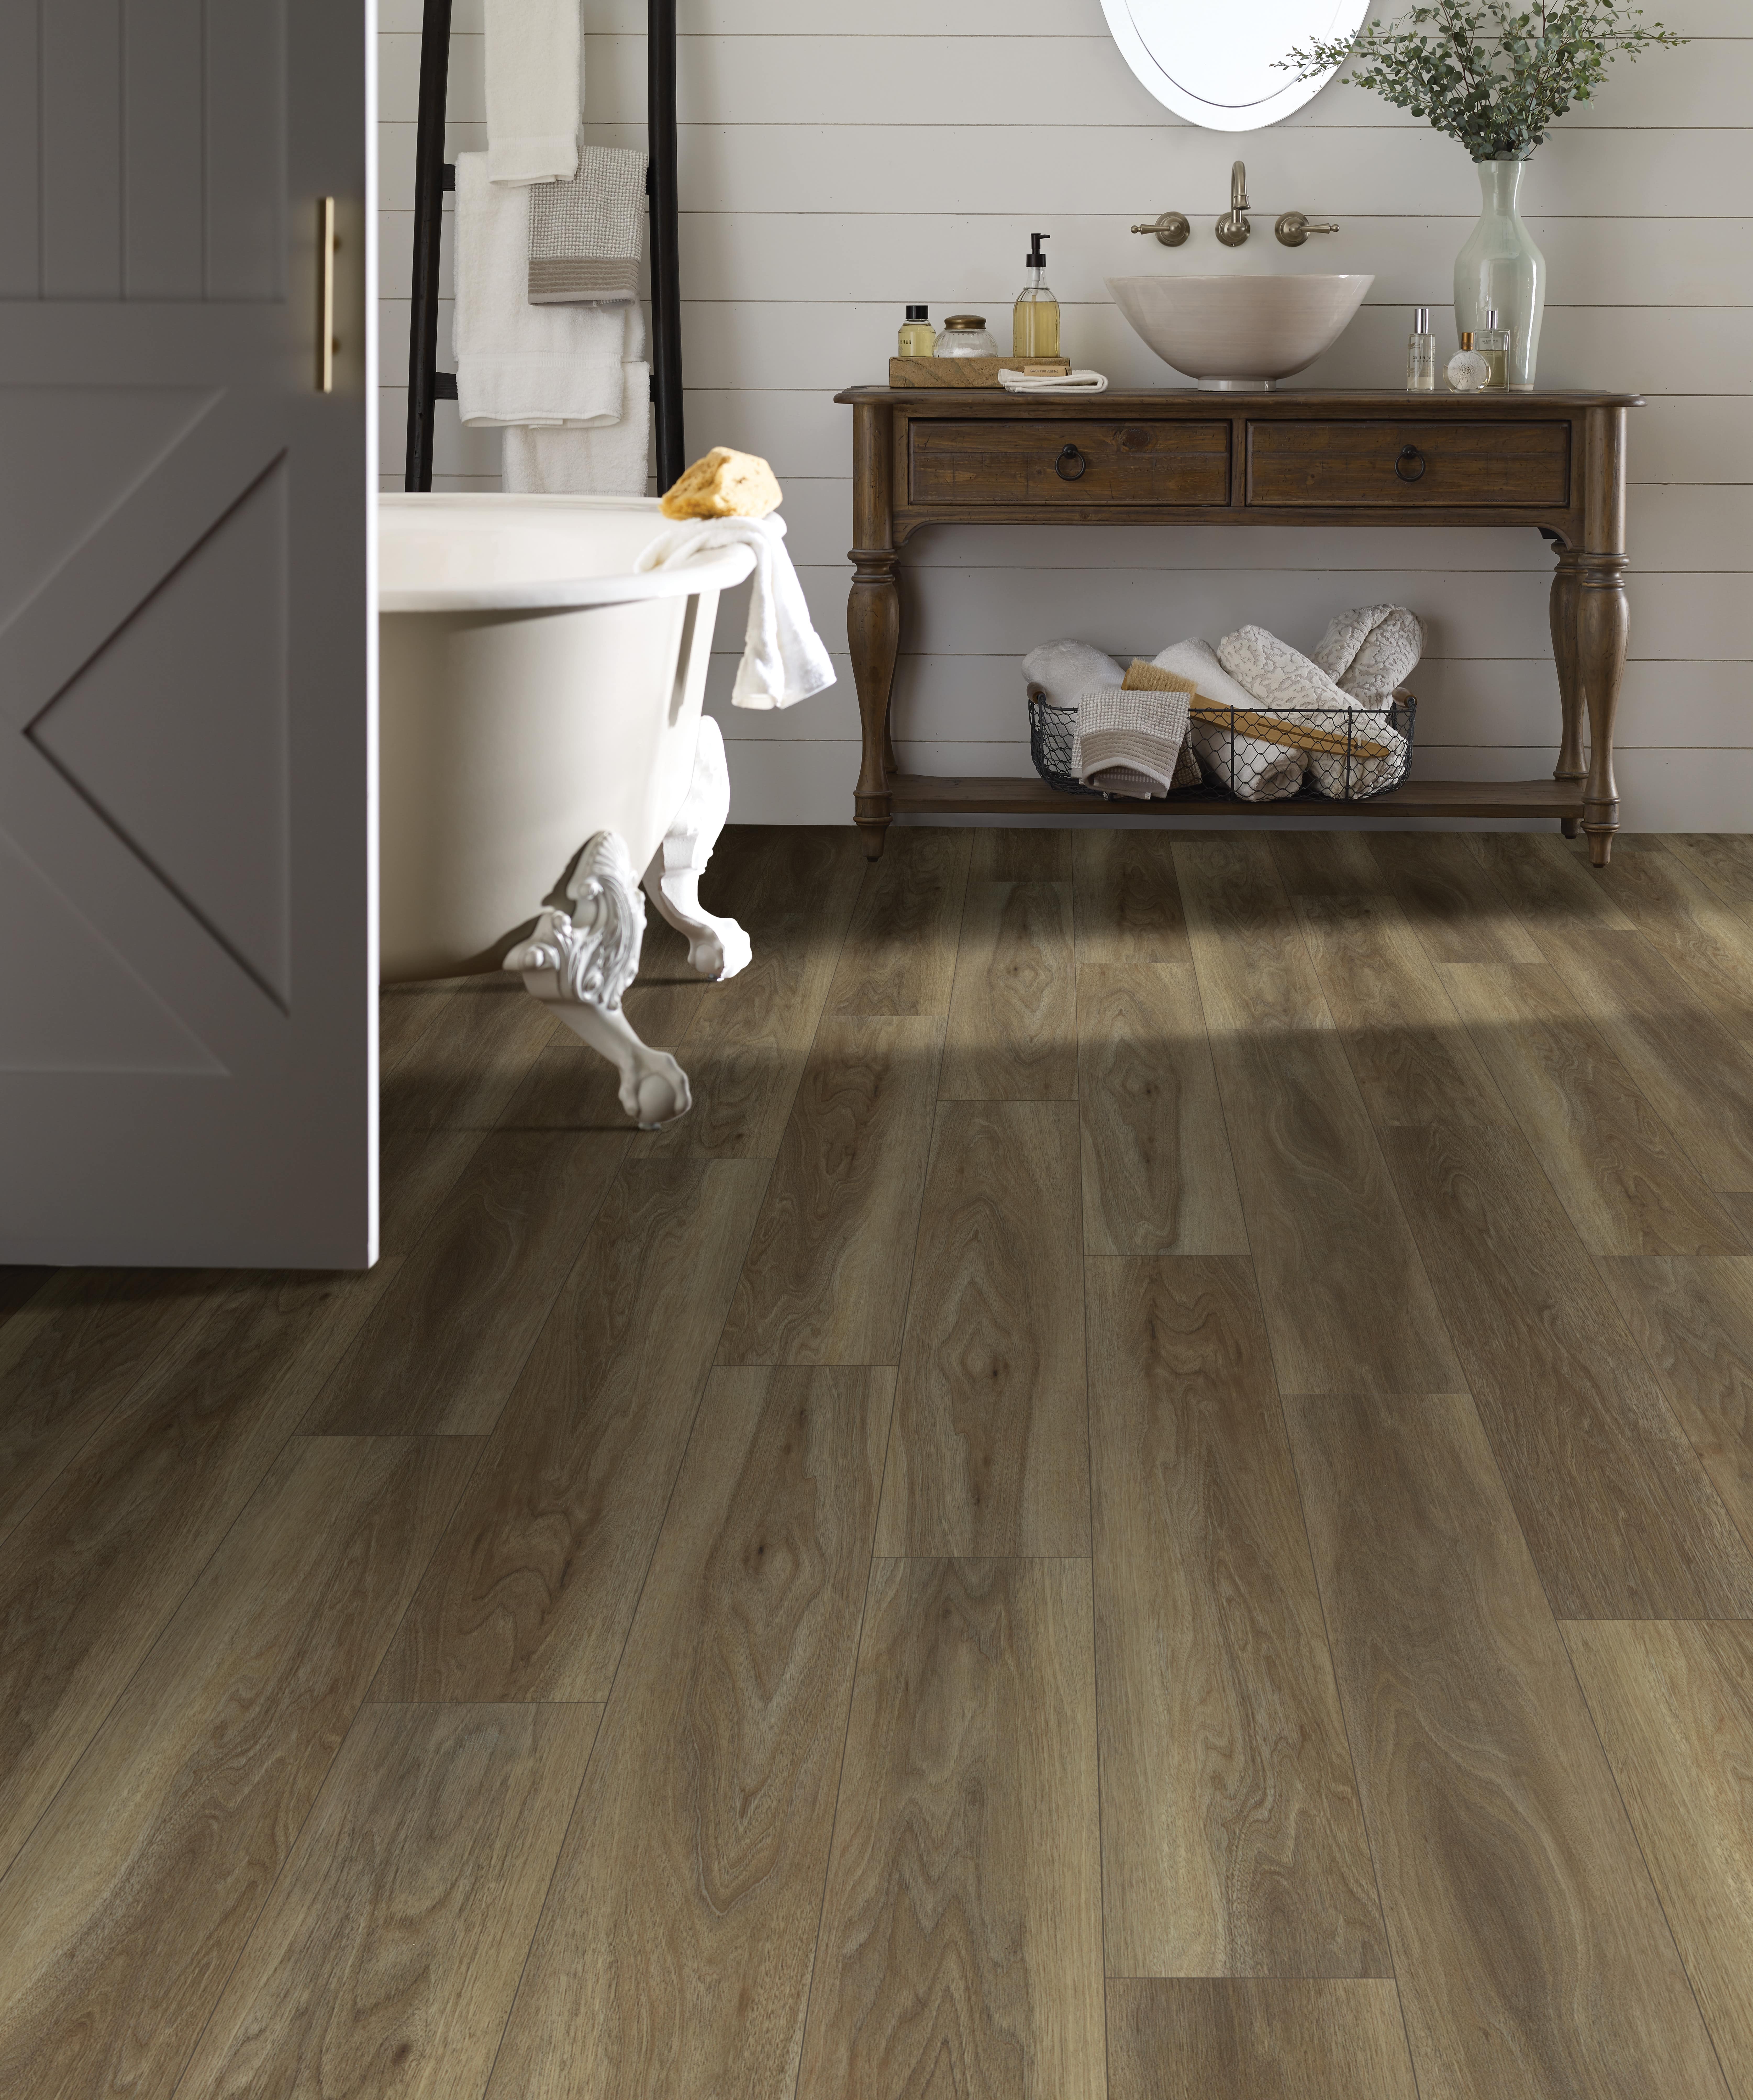 Wood Floor Bathrooms How To Do Them, Is It Bad To Put Laminate Flooring In A Bathroom